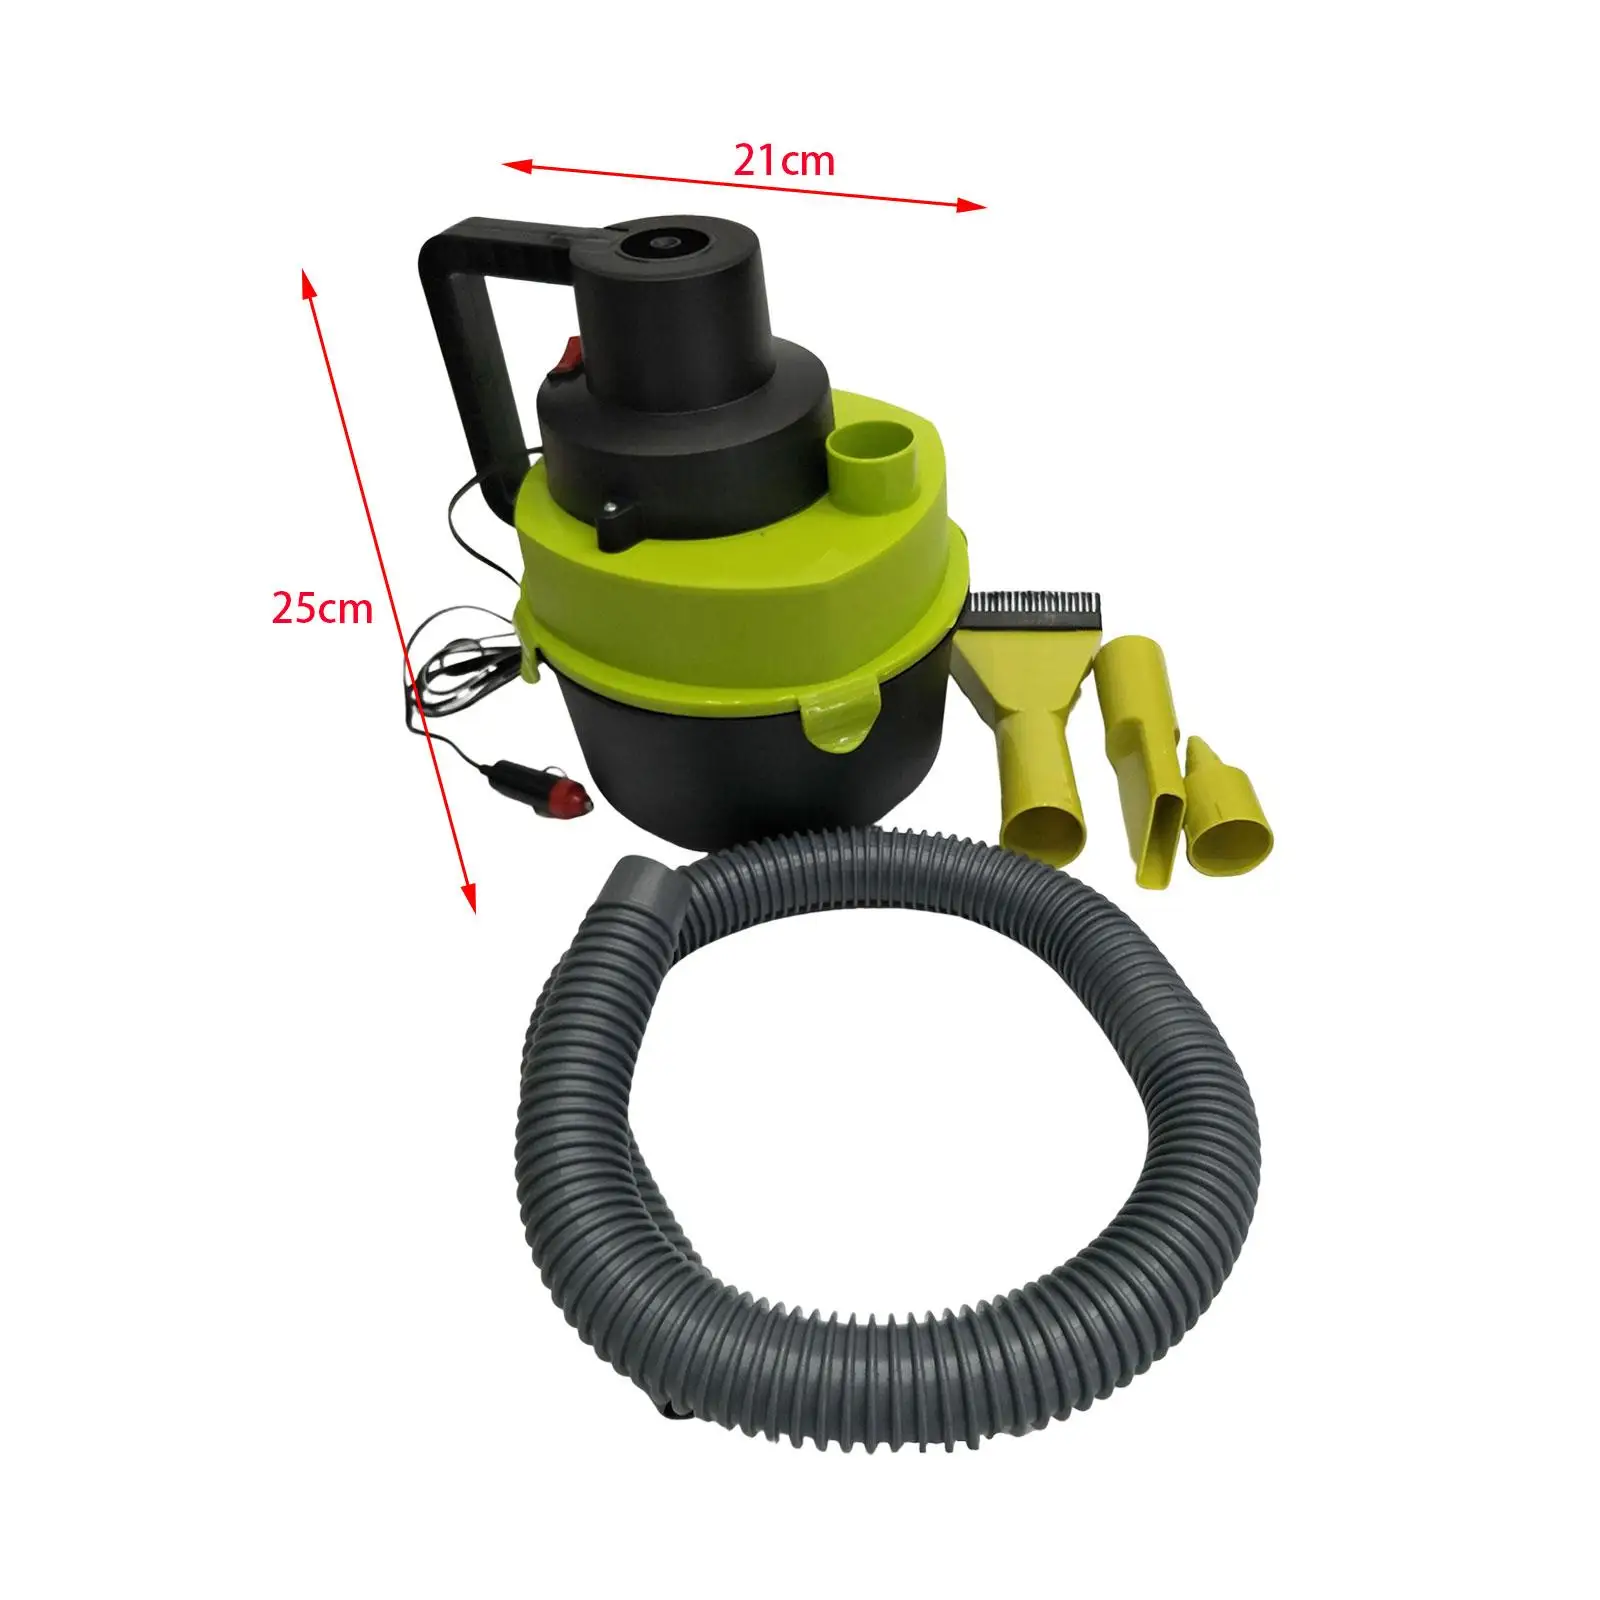 Portable Shop Vacuum with Attachments Multifunctional Debris Blowing Function